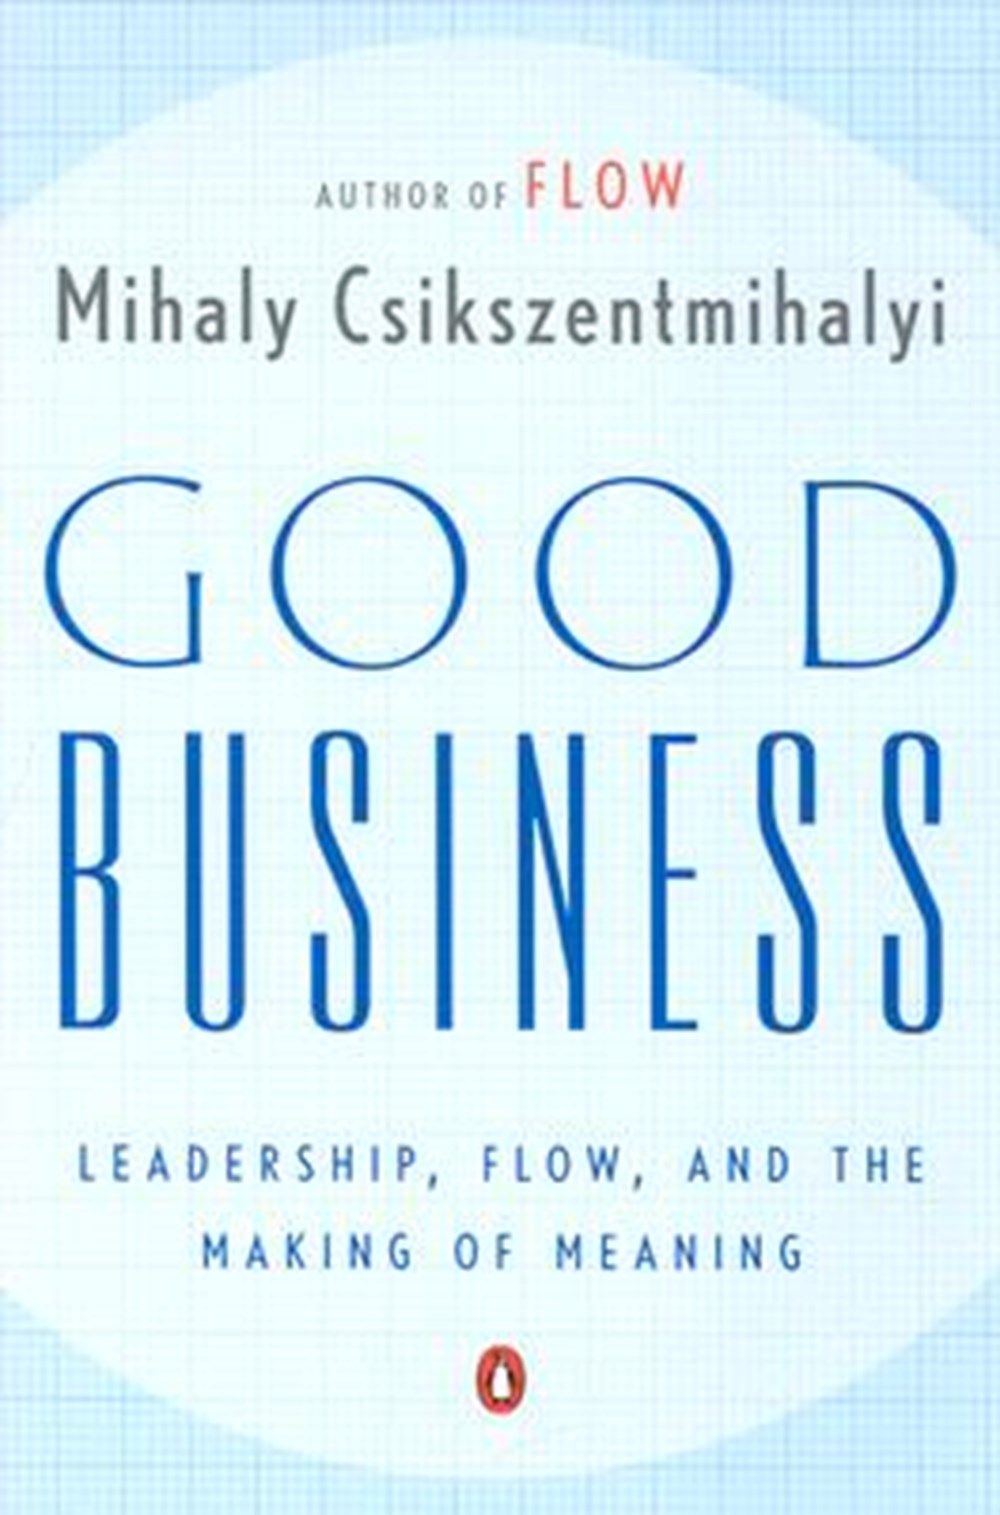 Good Business Leadership, Flow, and the Making of Meaning